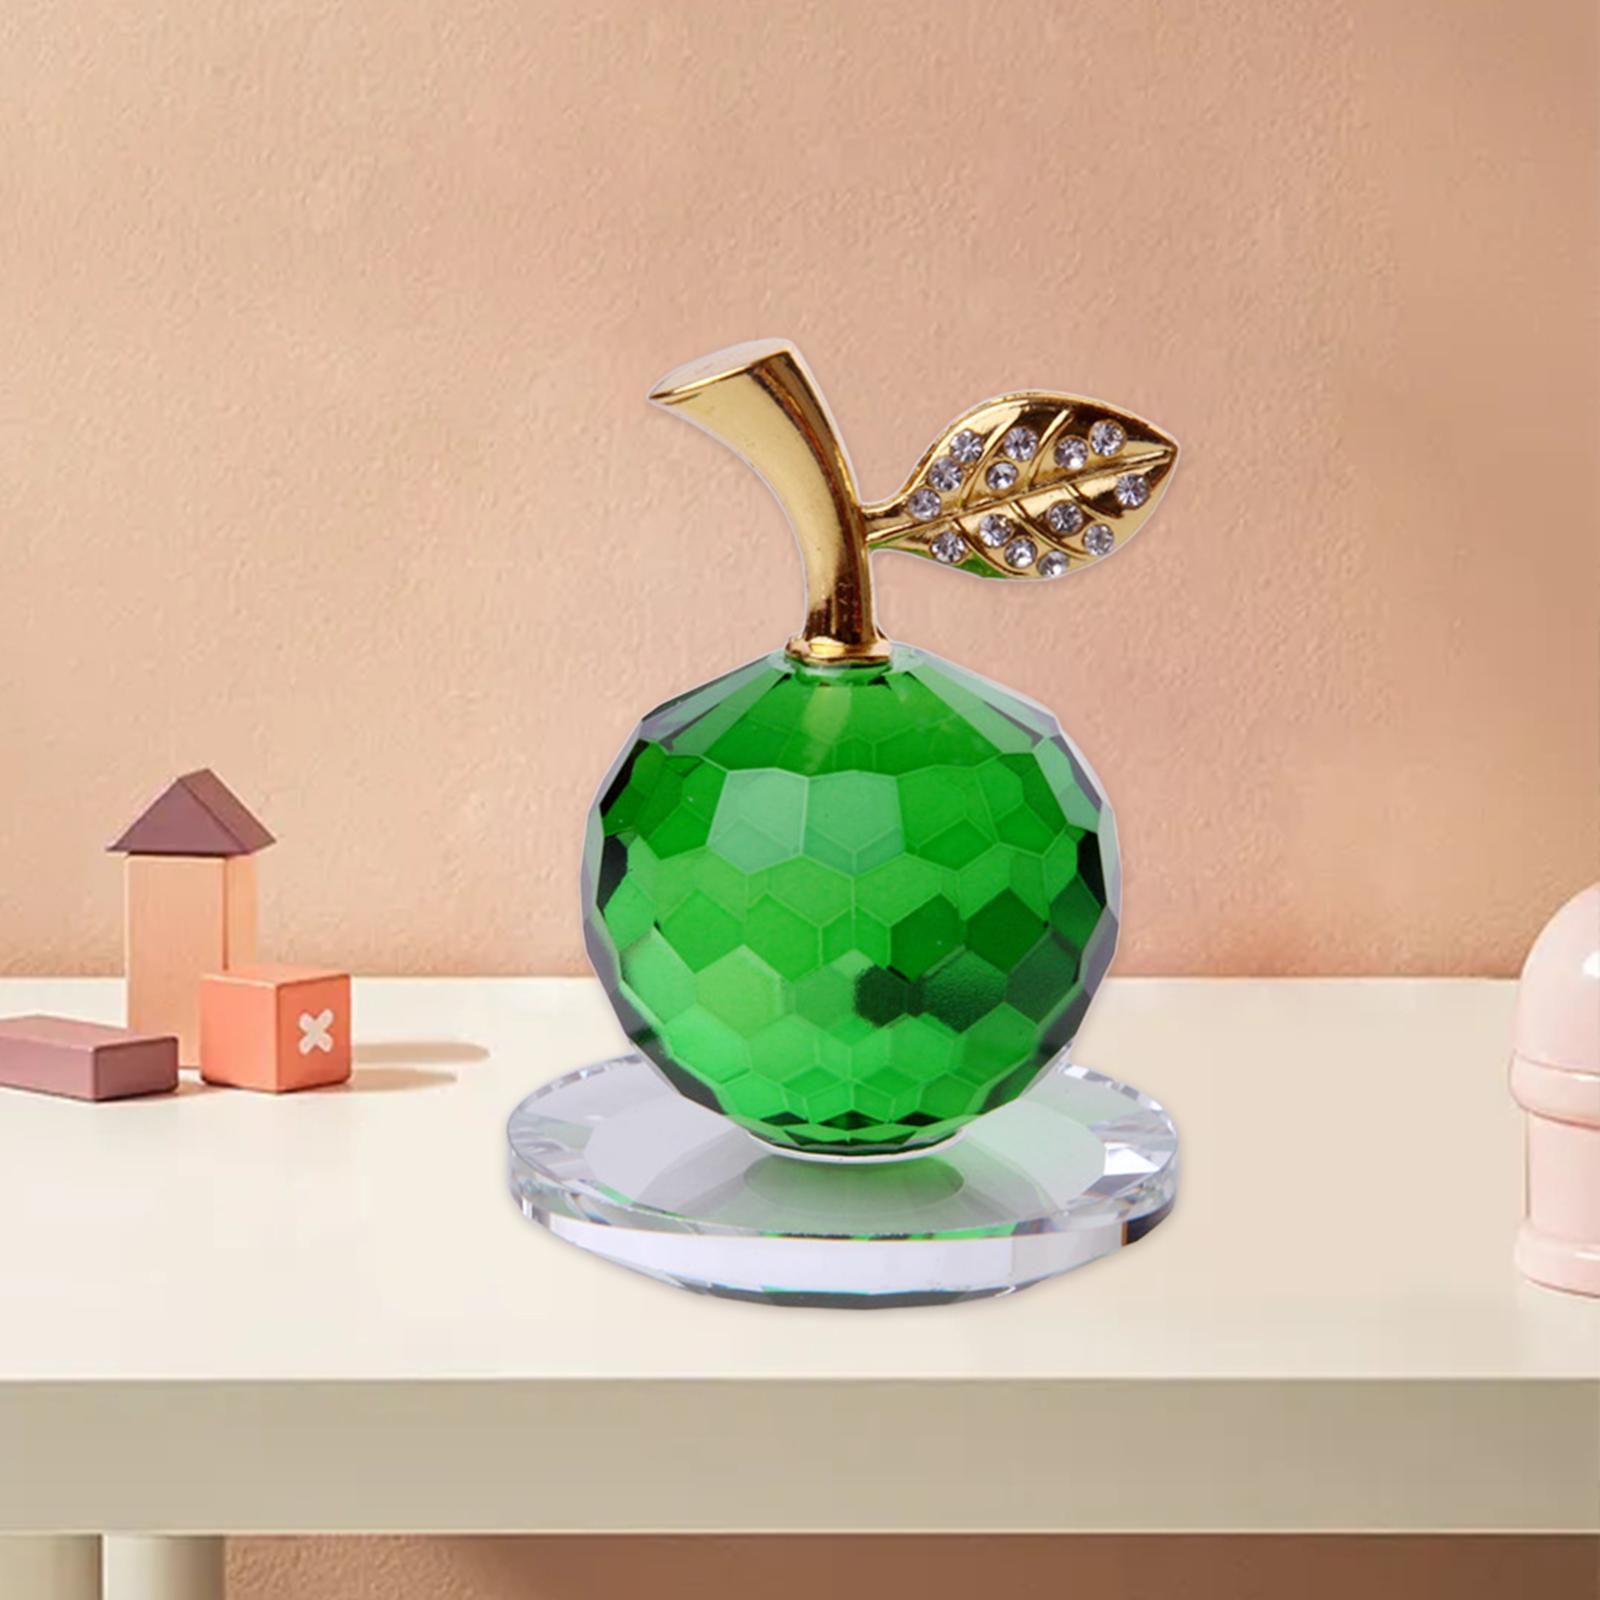 Crystal Apple Figurine Paperweight Ornament Home Decor Collectibles Gift Green